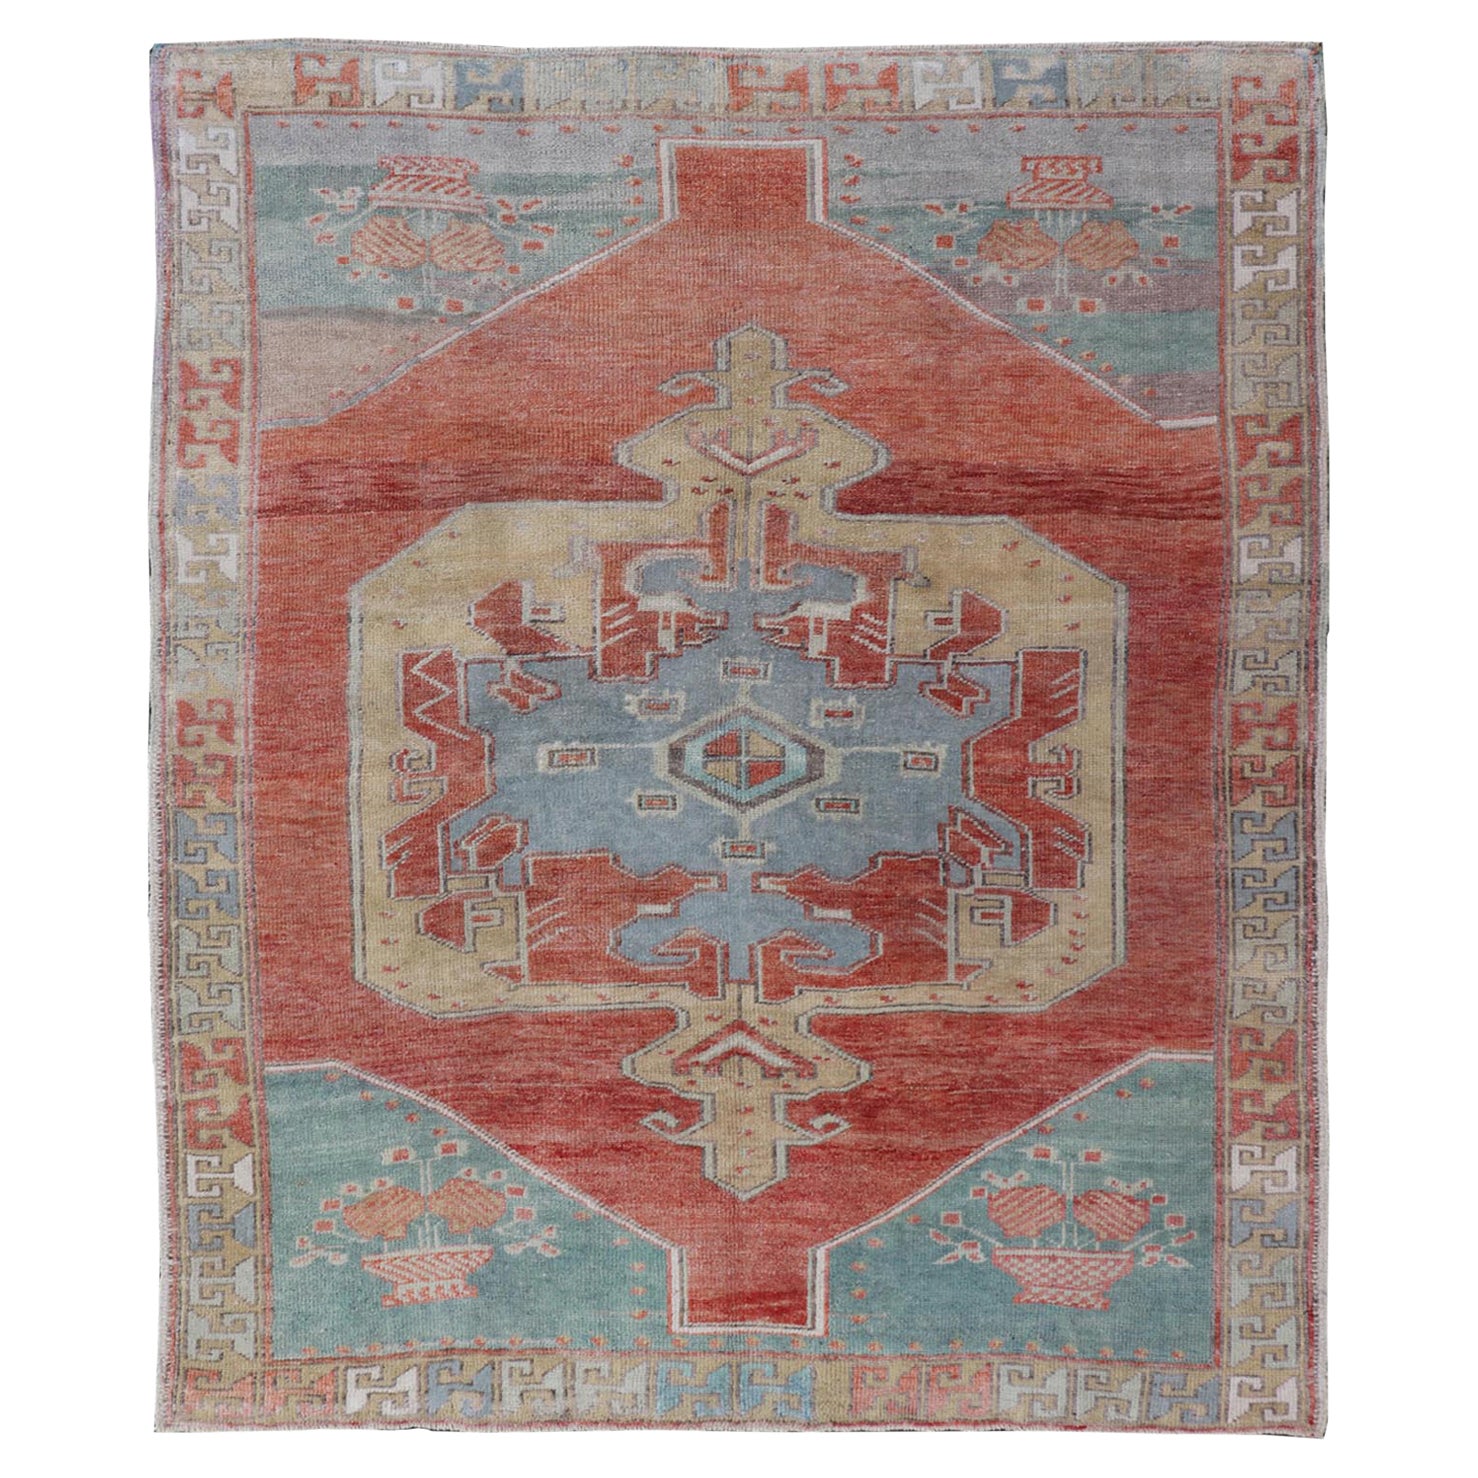 Vintage Turkish Oushak Rug with Large Medallion Design in Soft Red, Blue, Yellow